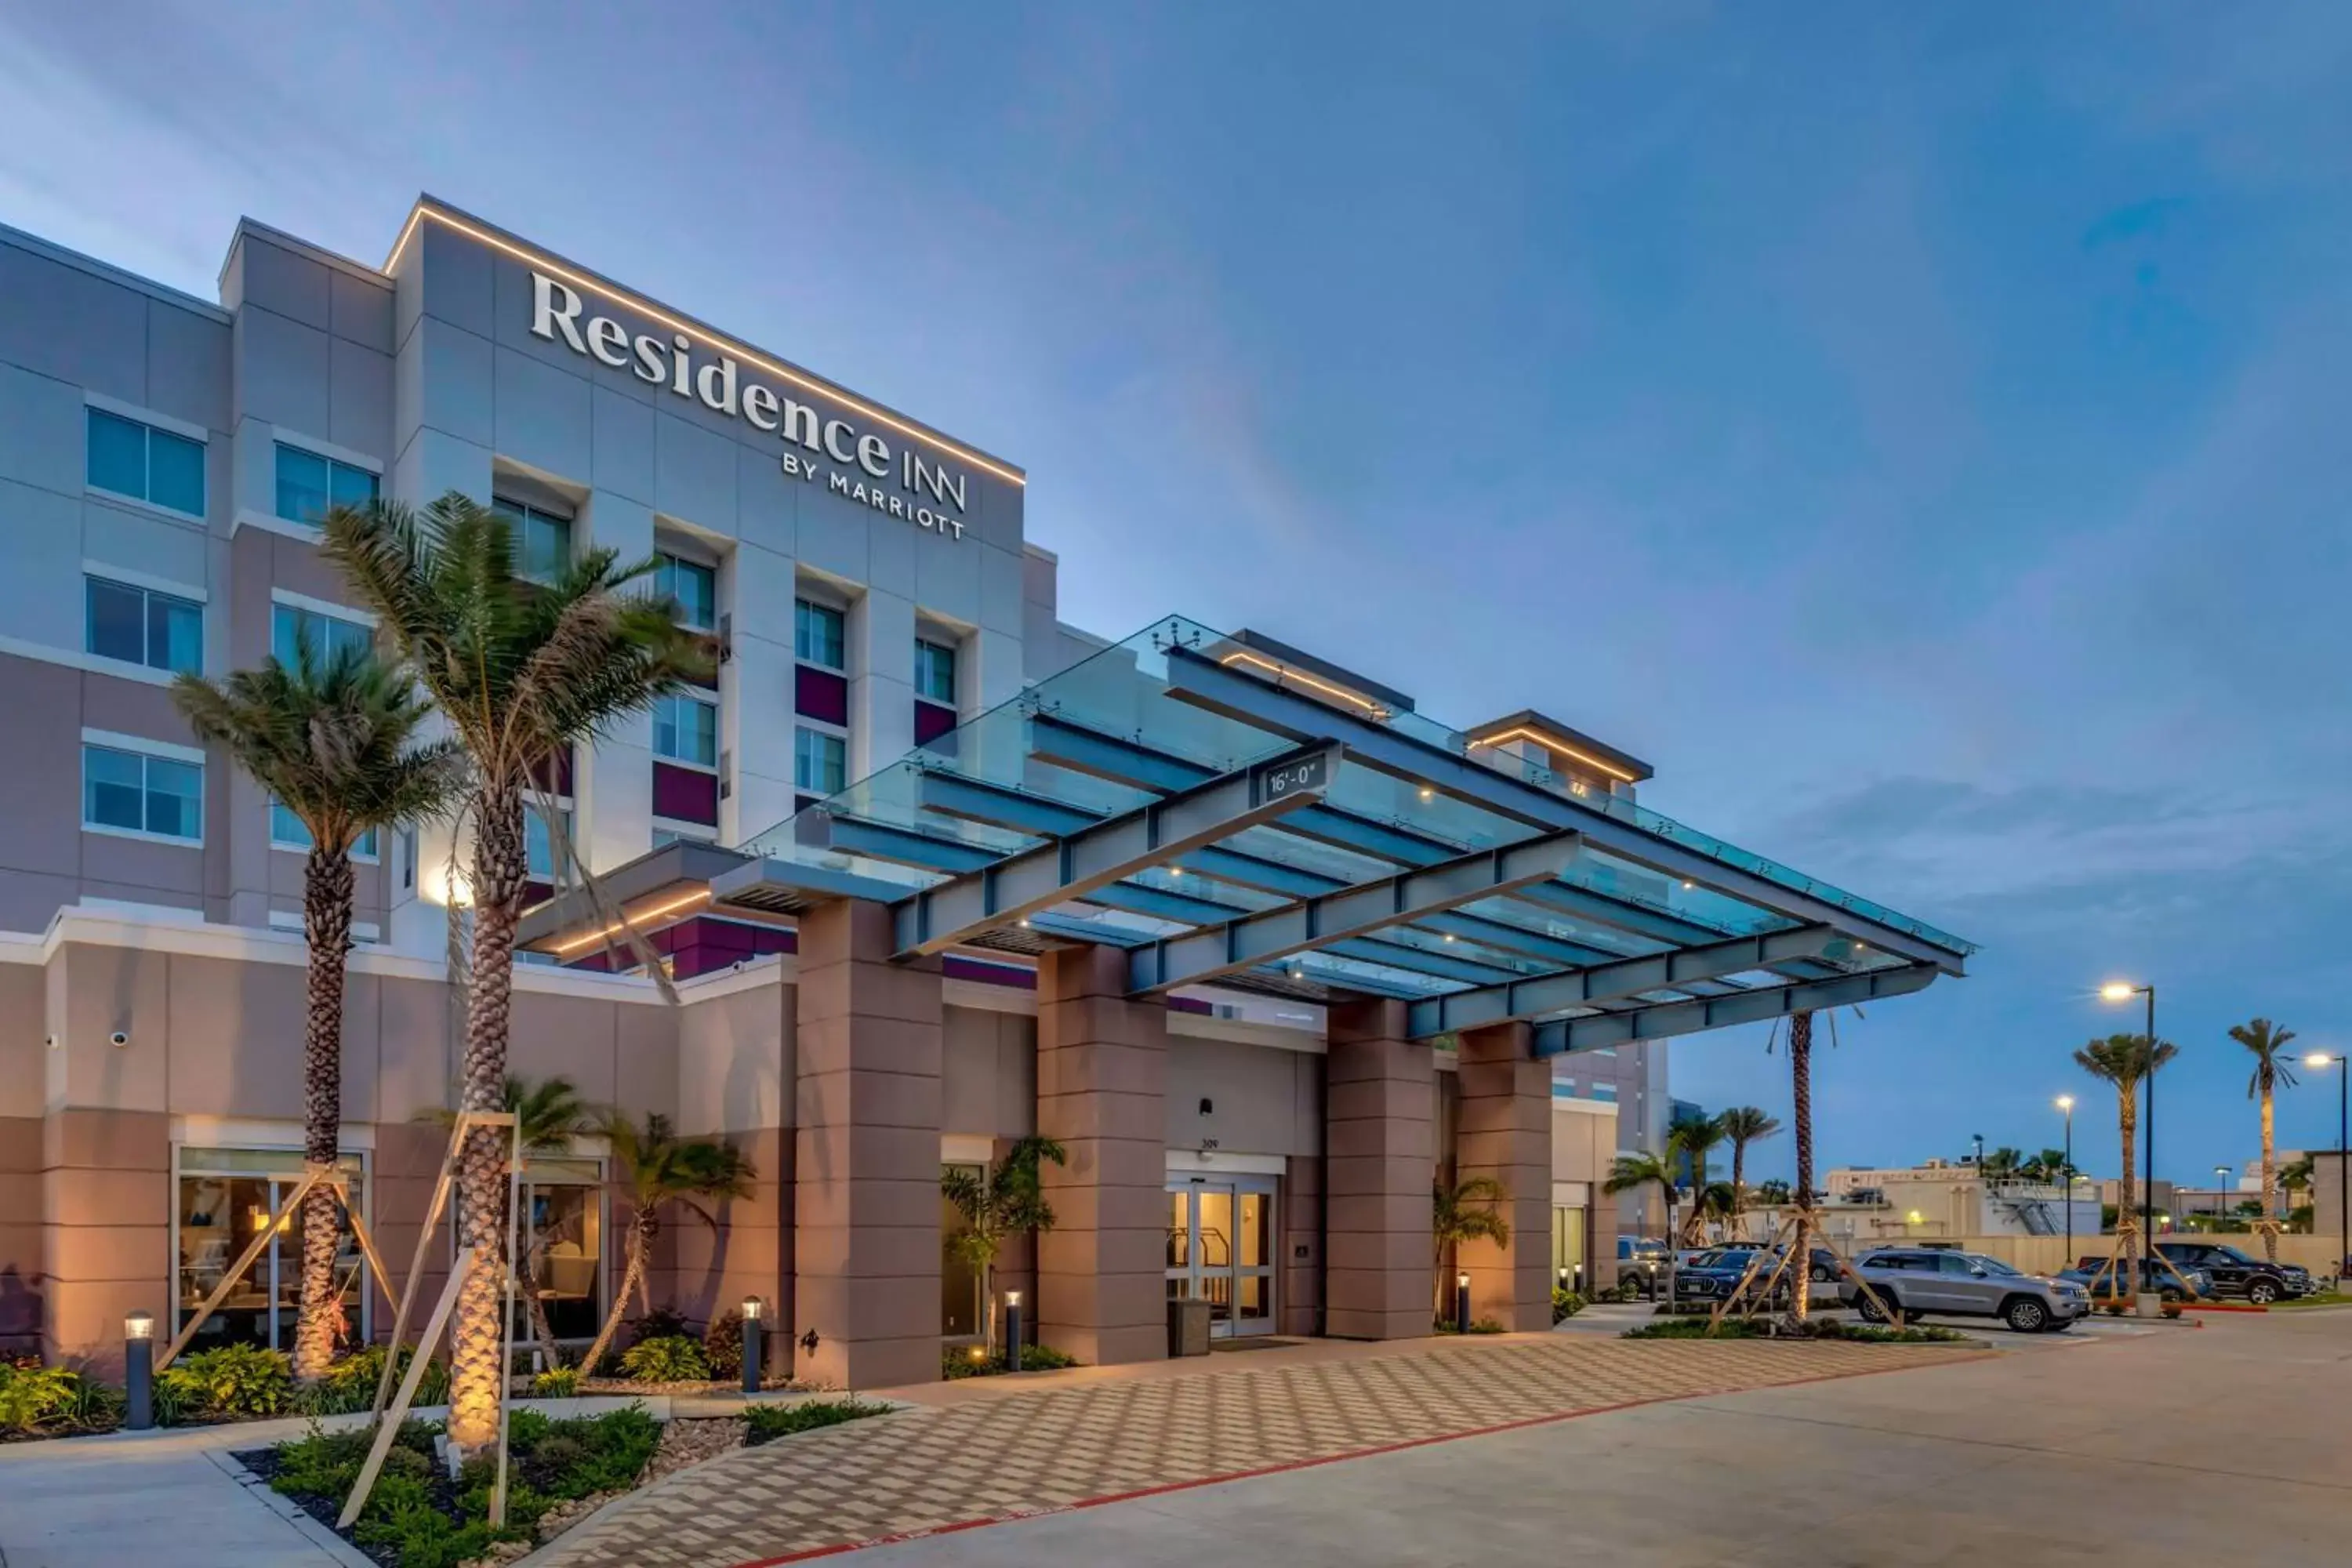 Property Building in Residence Inn by Marriott Corpus Christi Downtown